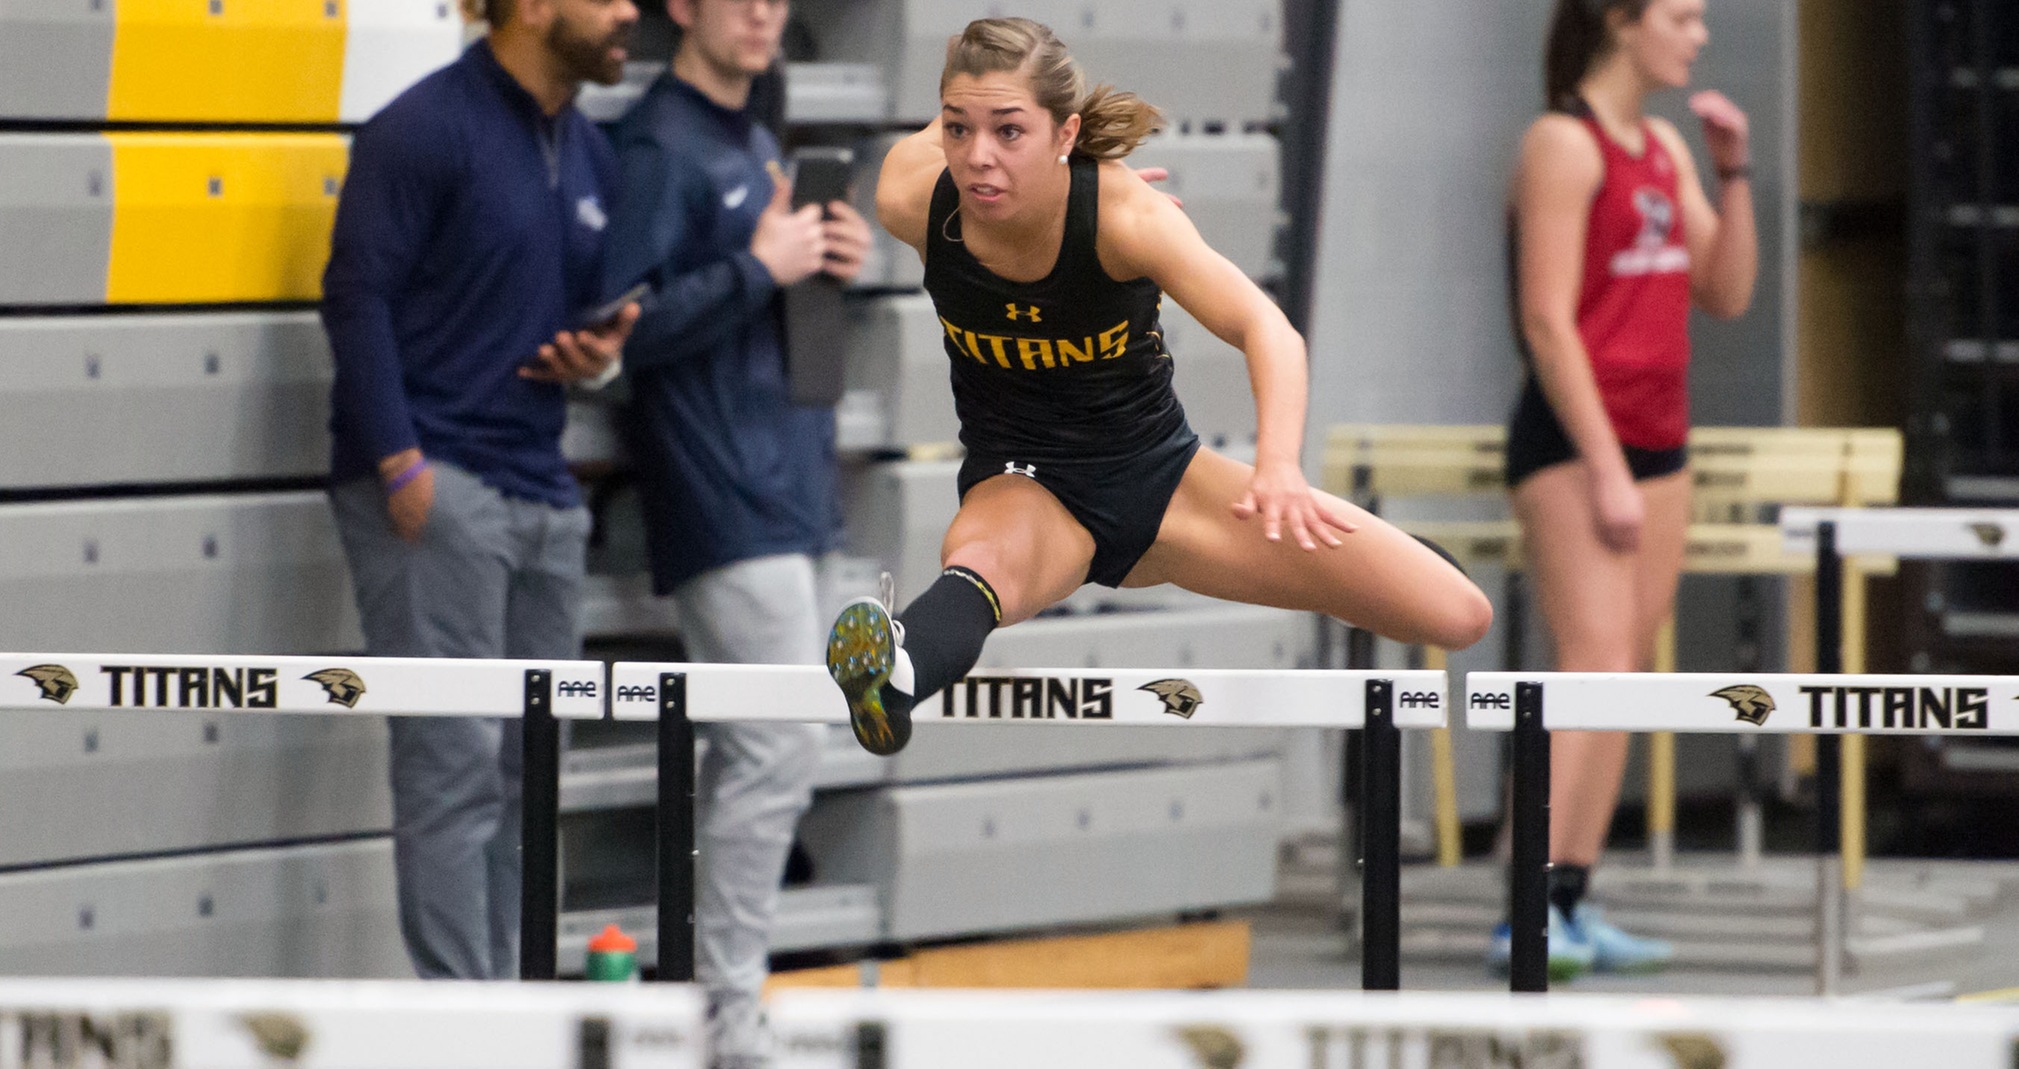 Cara Volz won the 60-meter hurdles while placing third in the triple jump at the Titan Challenge.